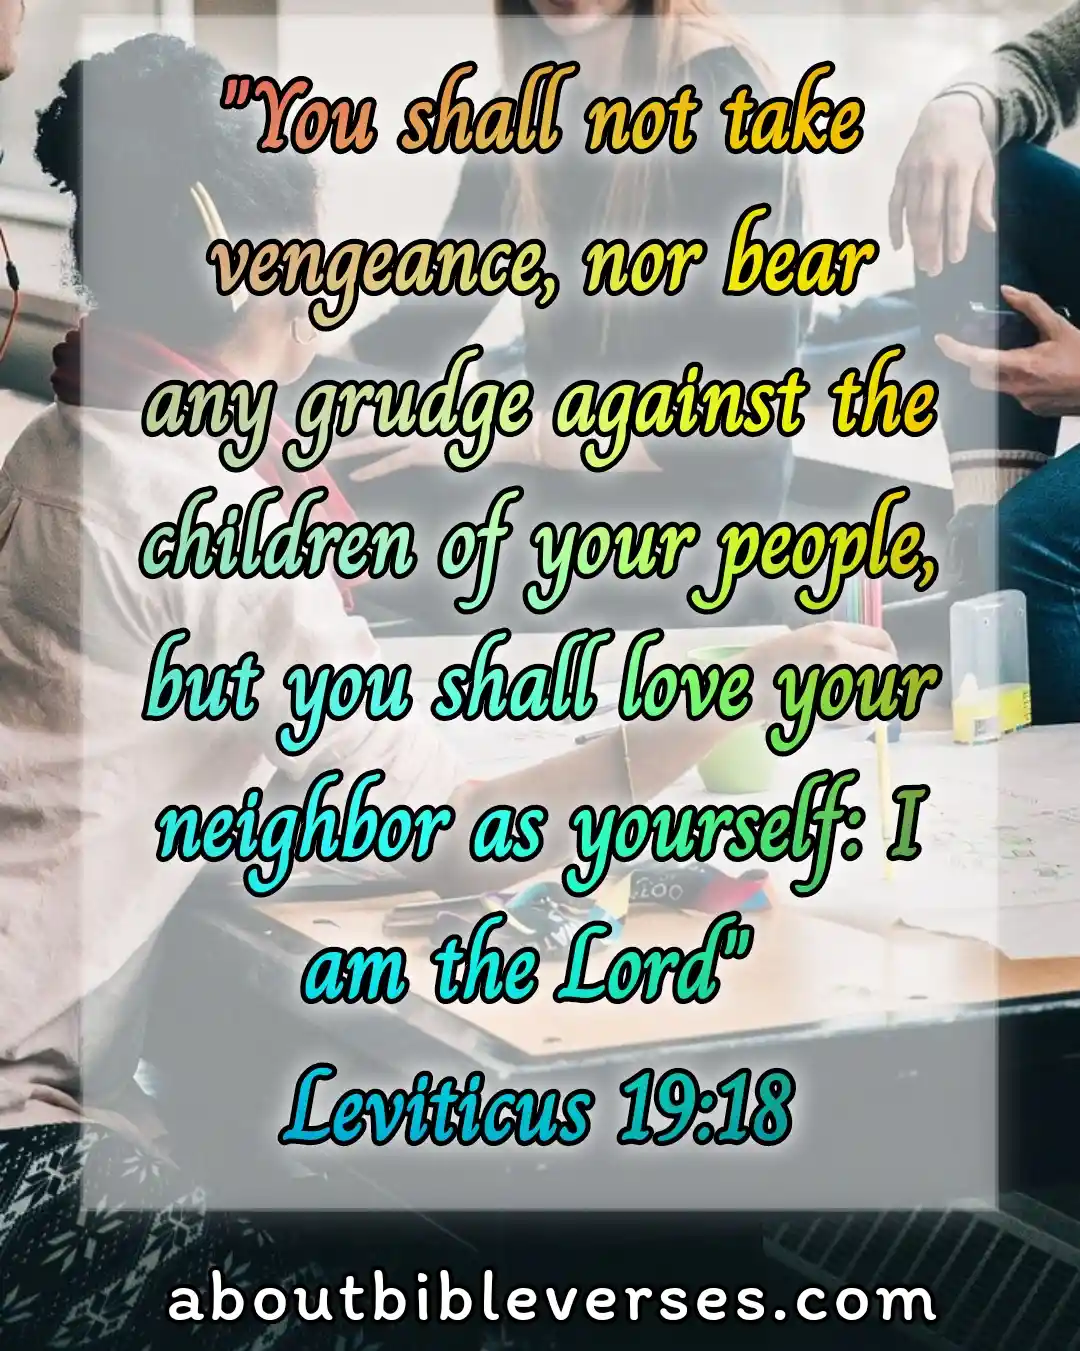 Today bible verse (Leviticus 19:18)